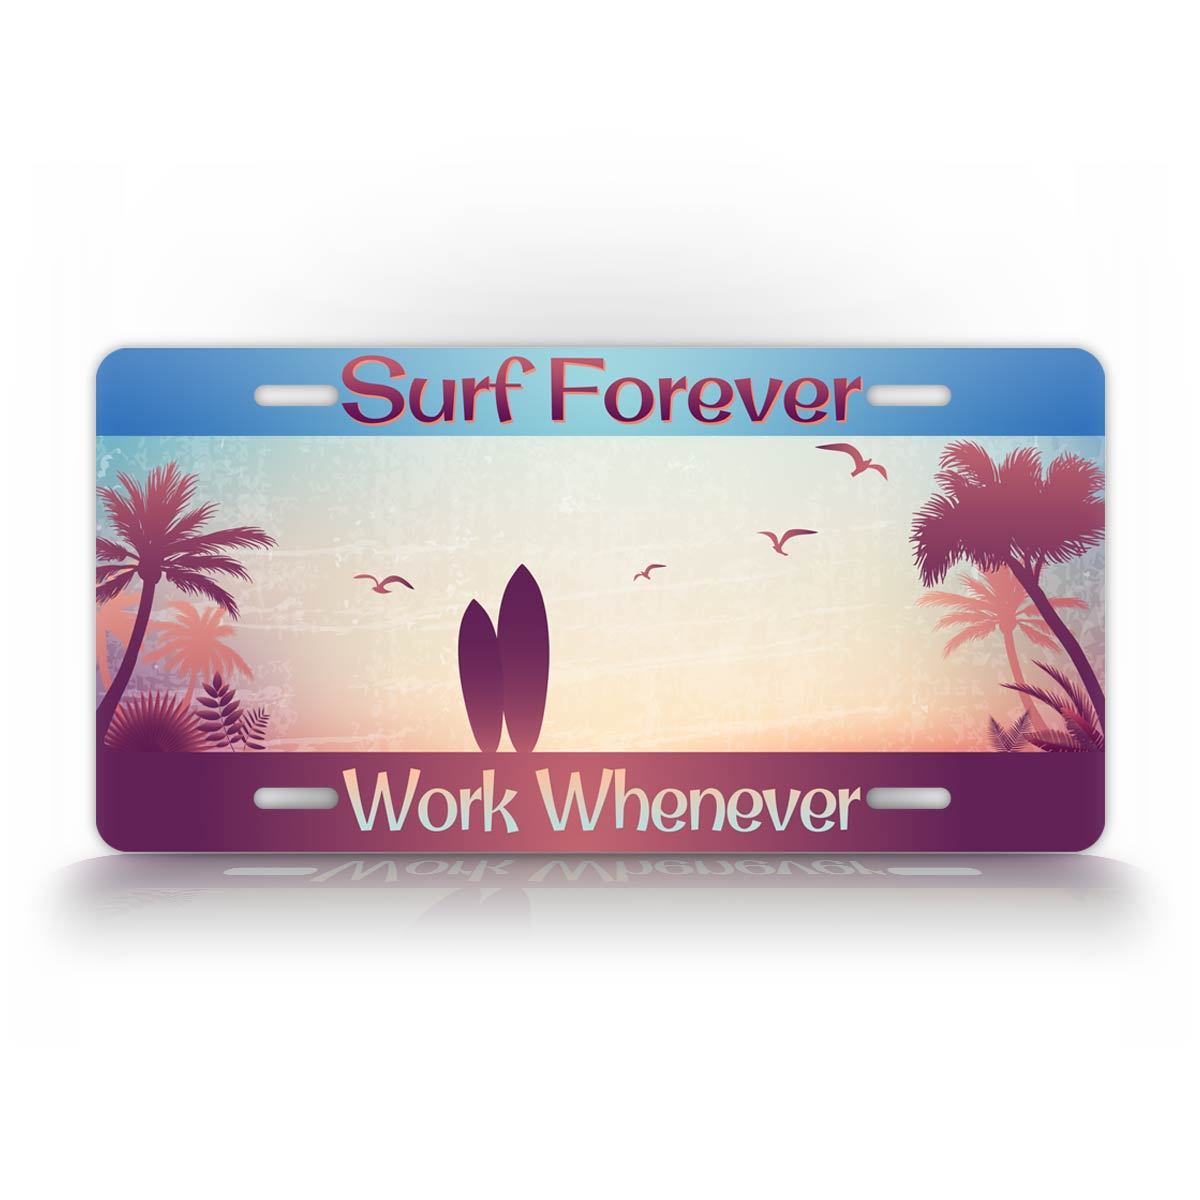 Surf Forever Work When Ever Surfing Auto Tag Surfboard Sunset License Plate 